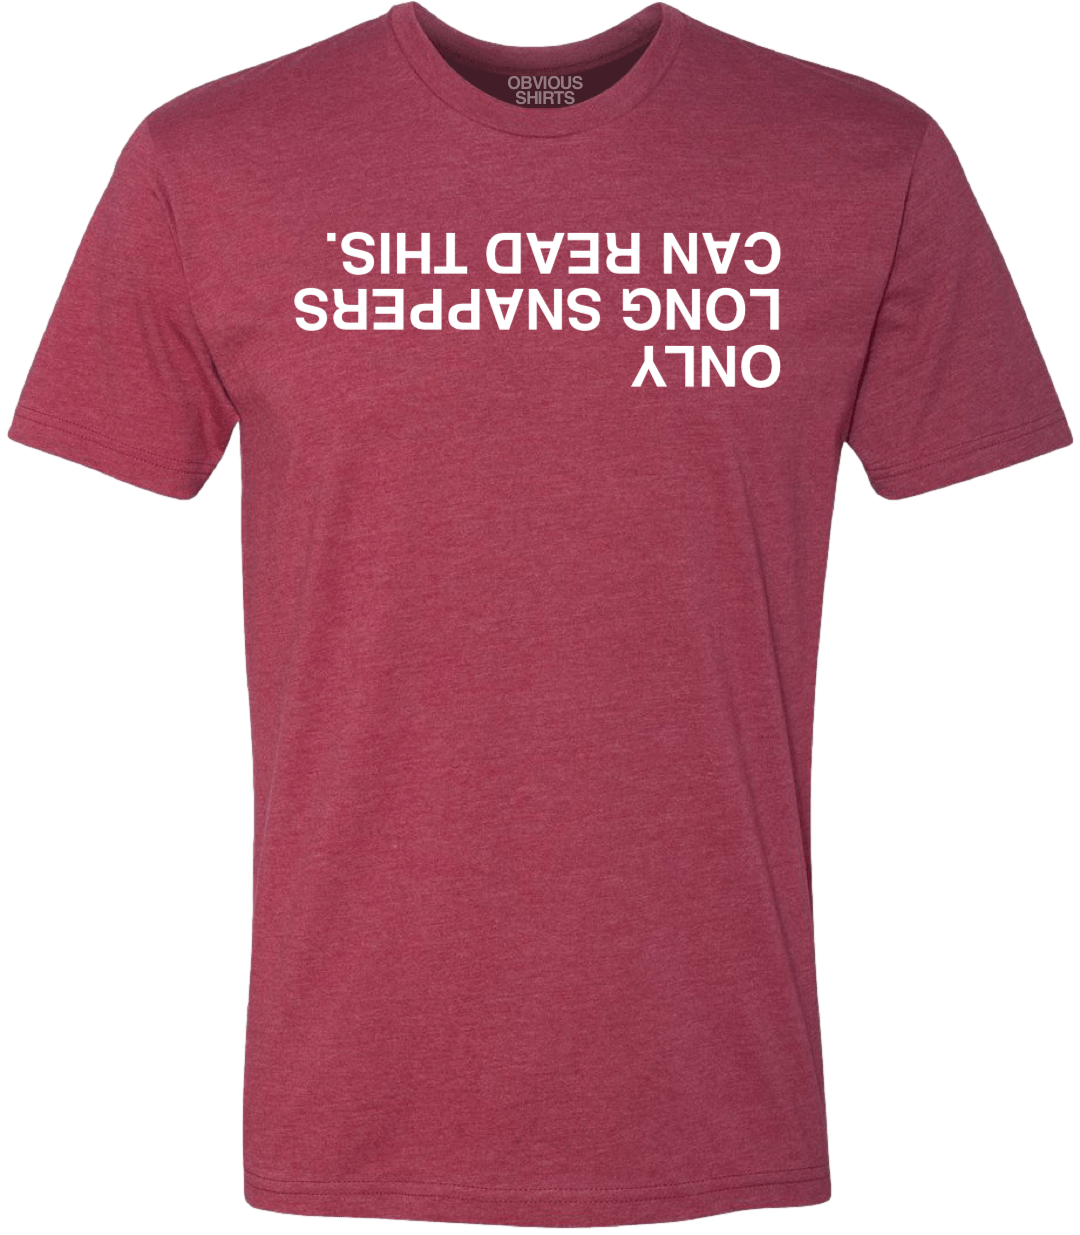 ONLY LONG SNAPPERS CAN READ THIS. (CRIMSON) - OBVIOUS SHIRTS